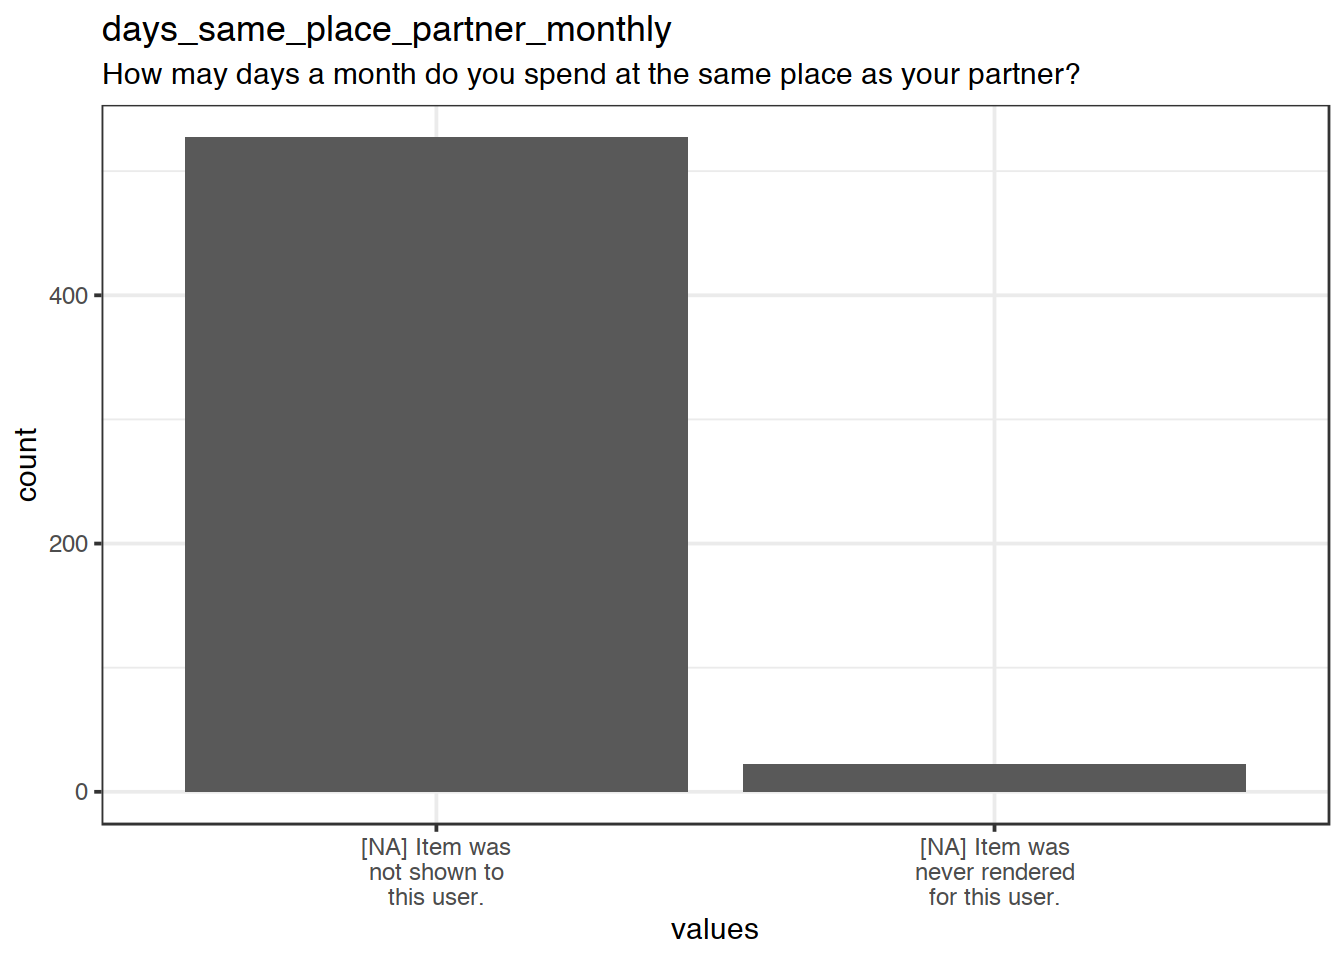 Plot of missing values for days_same_place_partner_monthly